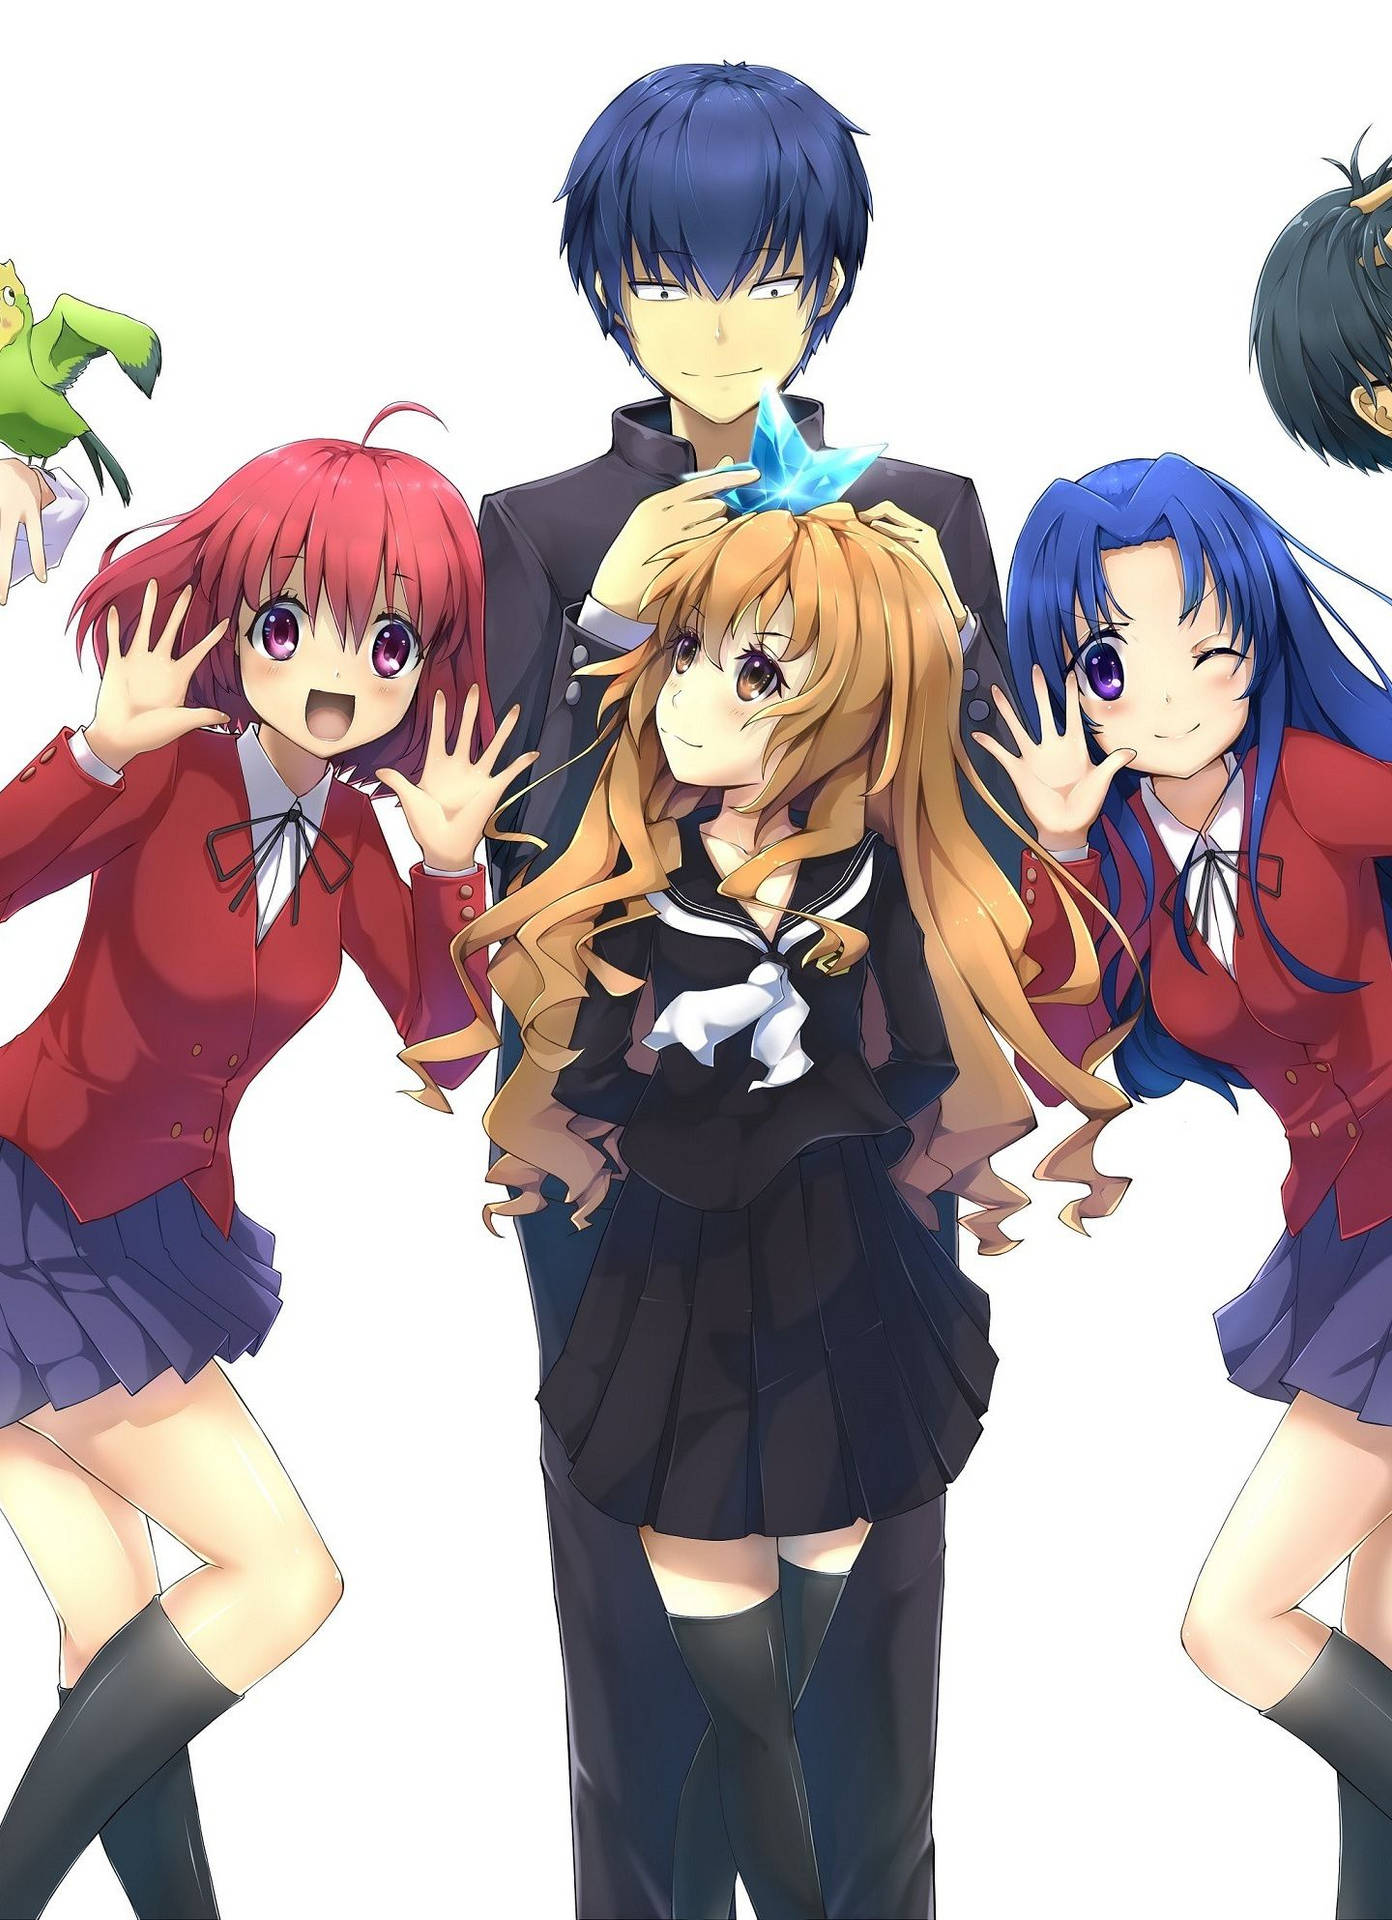 "The gang of Toradora ready to take on any challenge!" Wallpaper